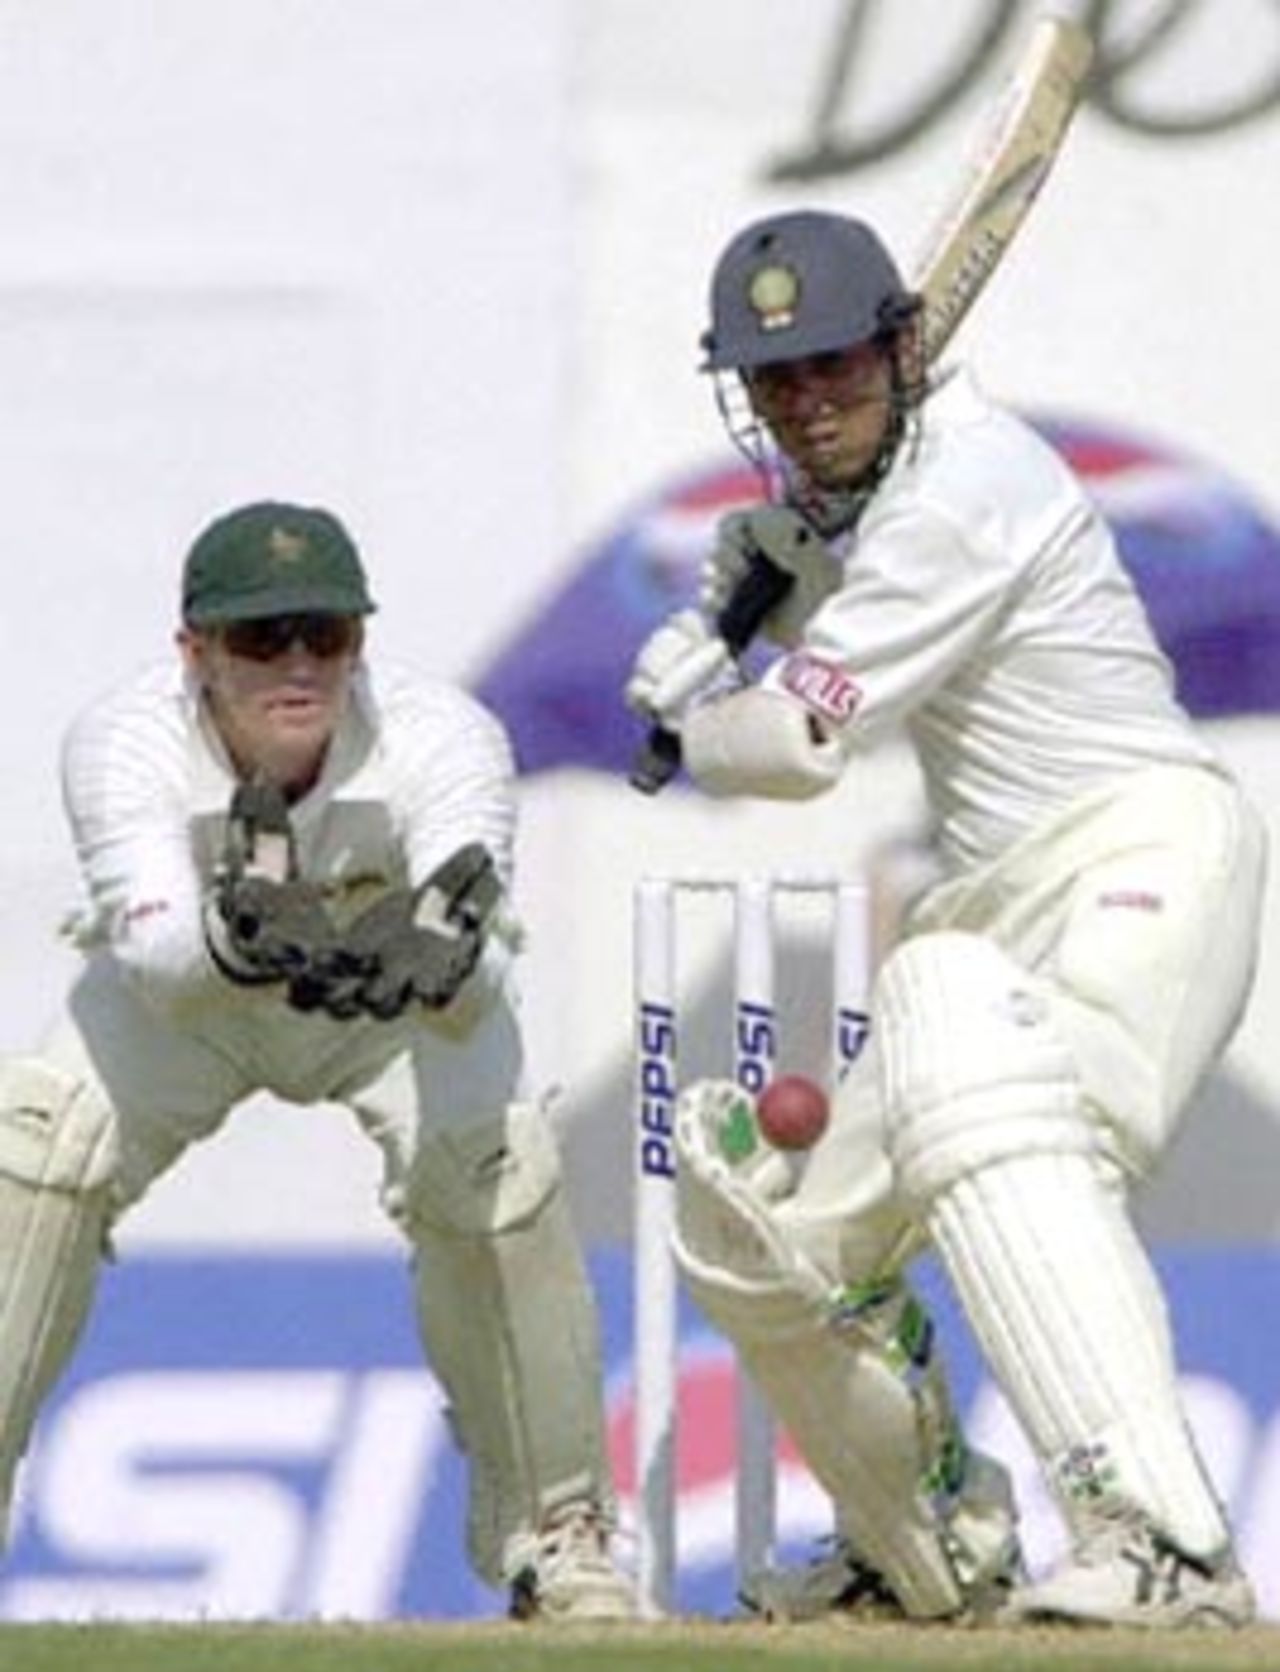 Indian opening batsman Shiv Das lines up a delivery from Zimbabwe bowler Viljoven as wicketkeeper Andy Flower (L) looks on during the first day of the second Test cricket match between India and Zimbabwe in Nagpur, 25 November 2000. Das scored 110 runs and India made 306 for 2 at close of the first day's play. India leads Zimbabwe 1-0 in the two Test series.